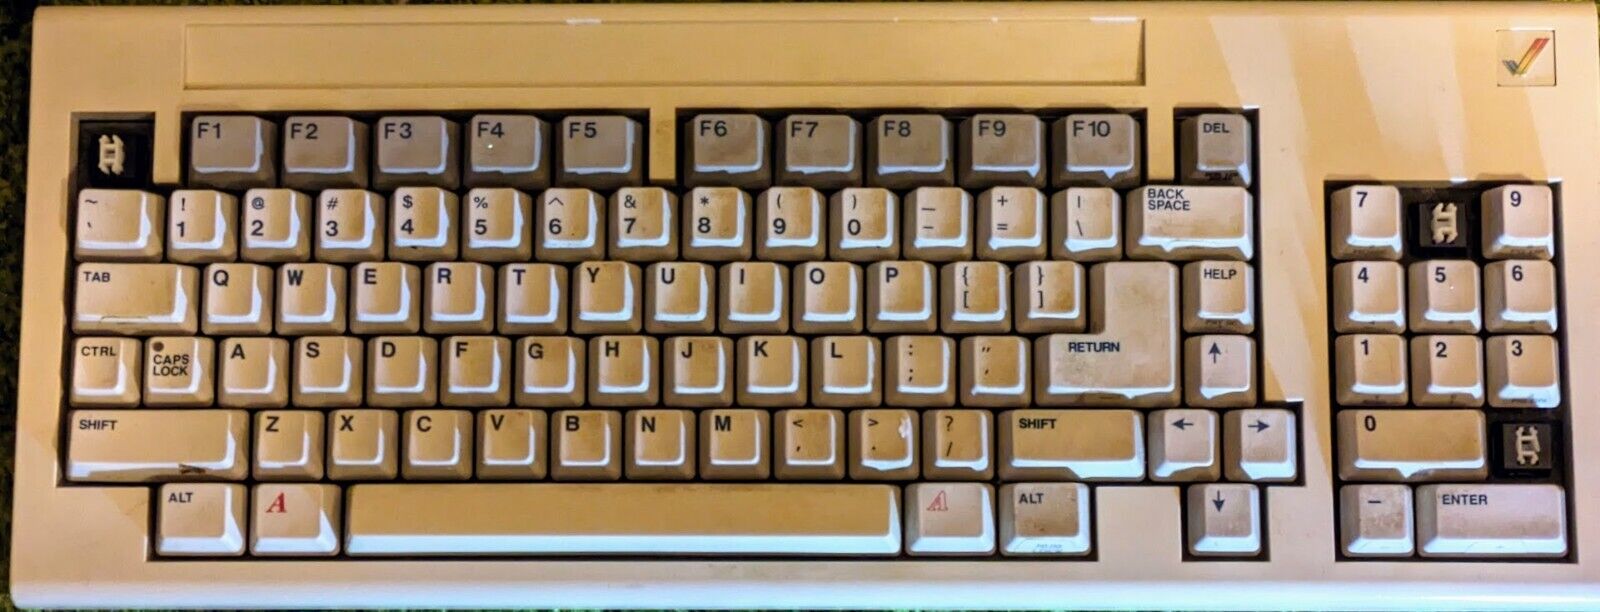 Vintage Commodore Amiga 1000 Keyboard & Mouse - Untested - As Is - No Computer